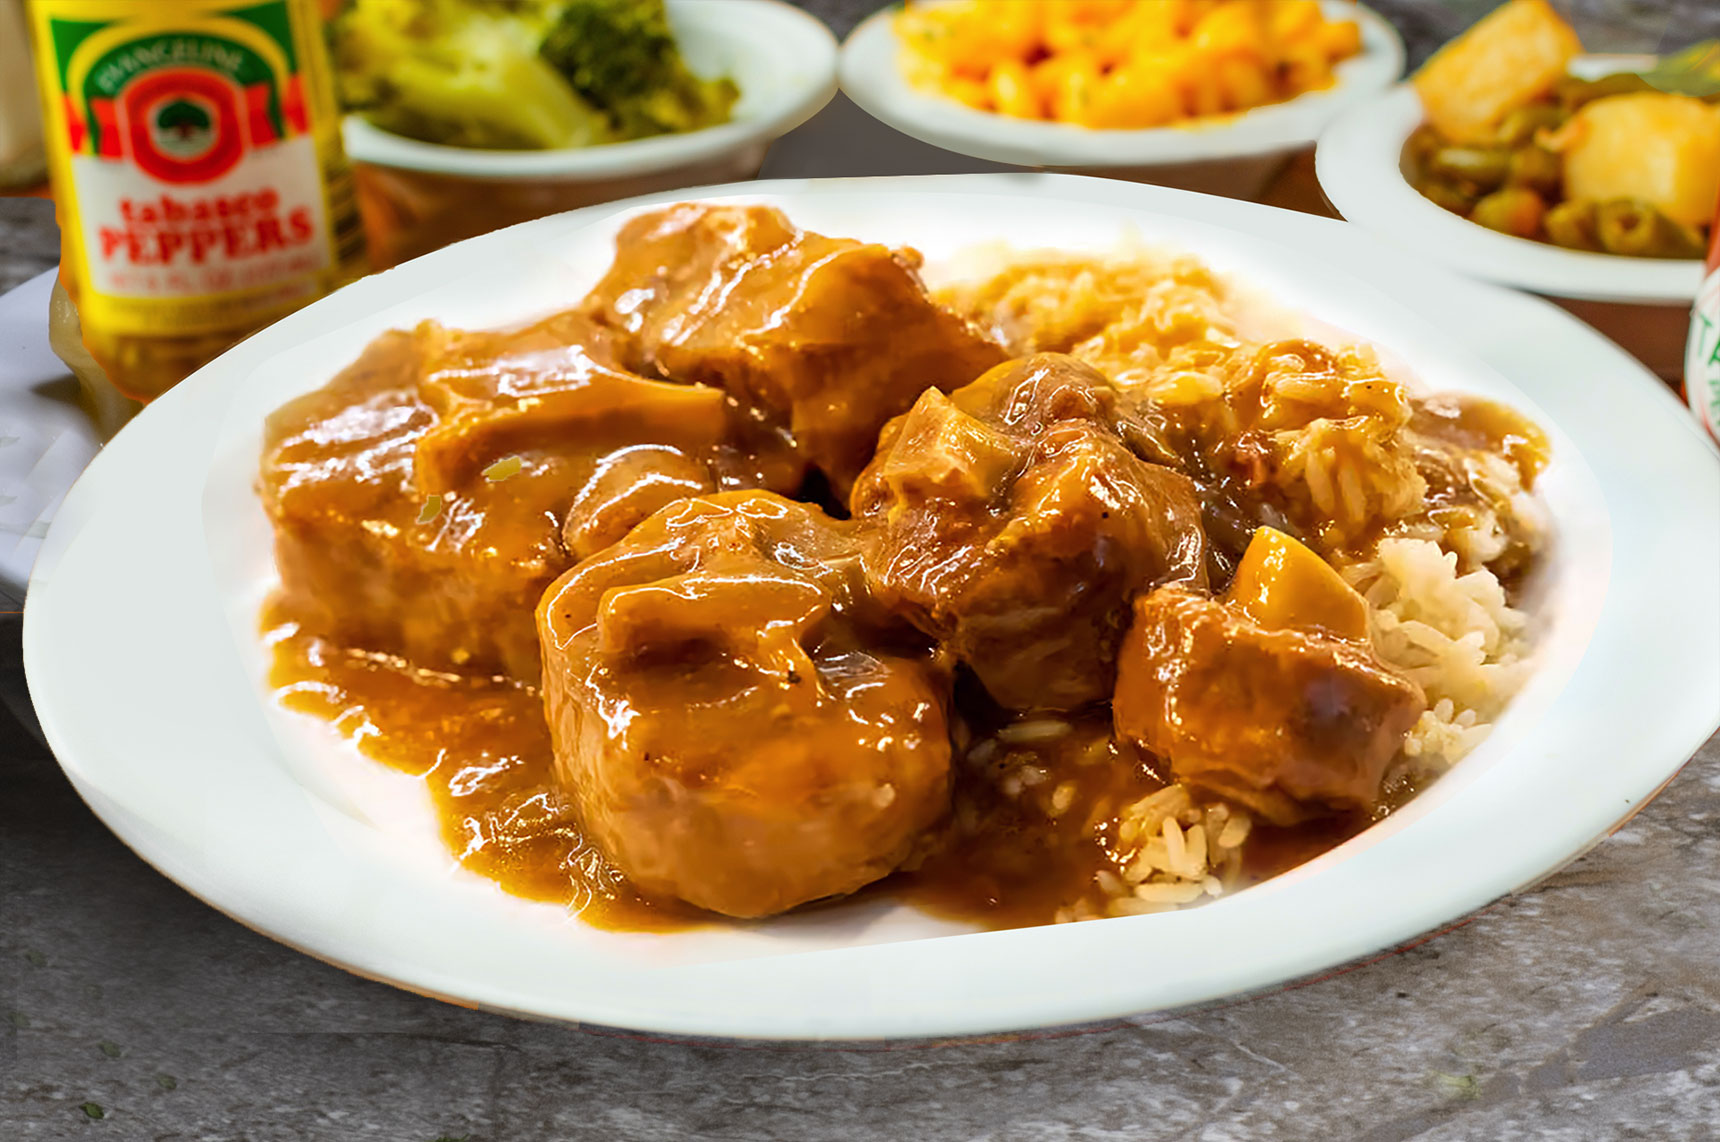 A plate of authentic soul food tender and flavorful Ox Tails, braised in a rich, savory gravy.